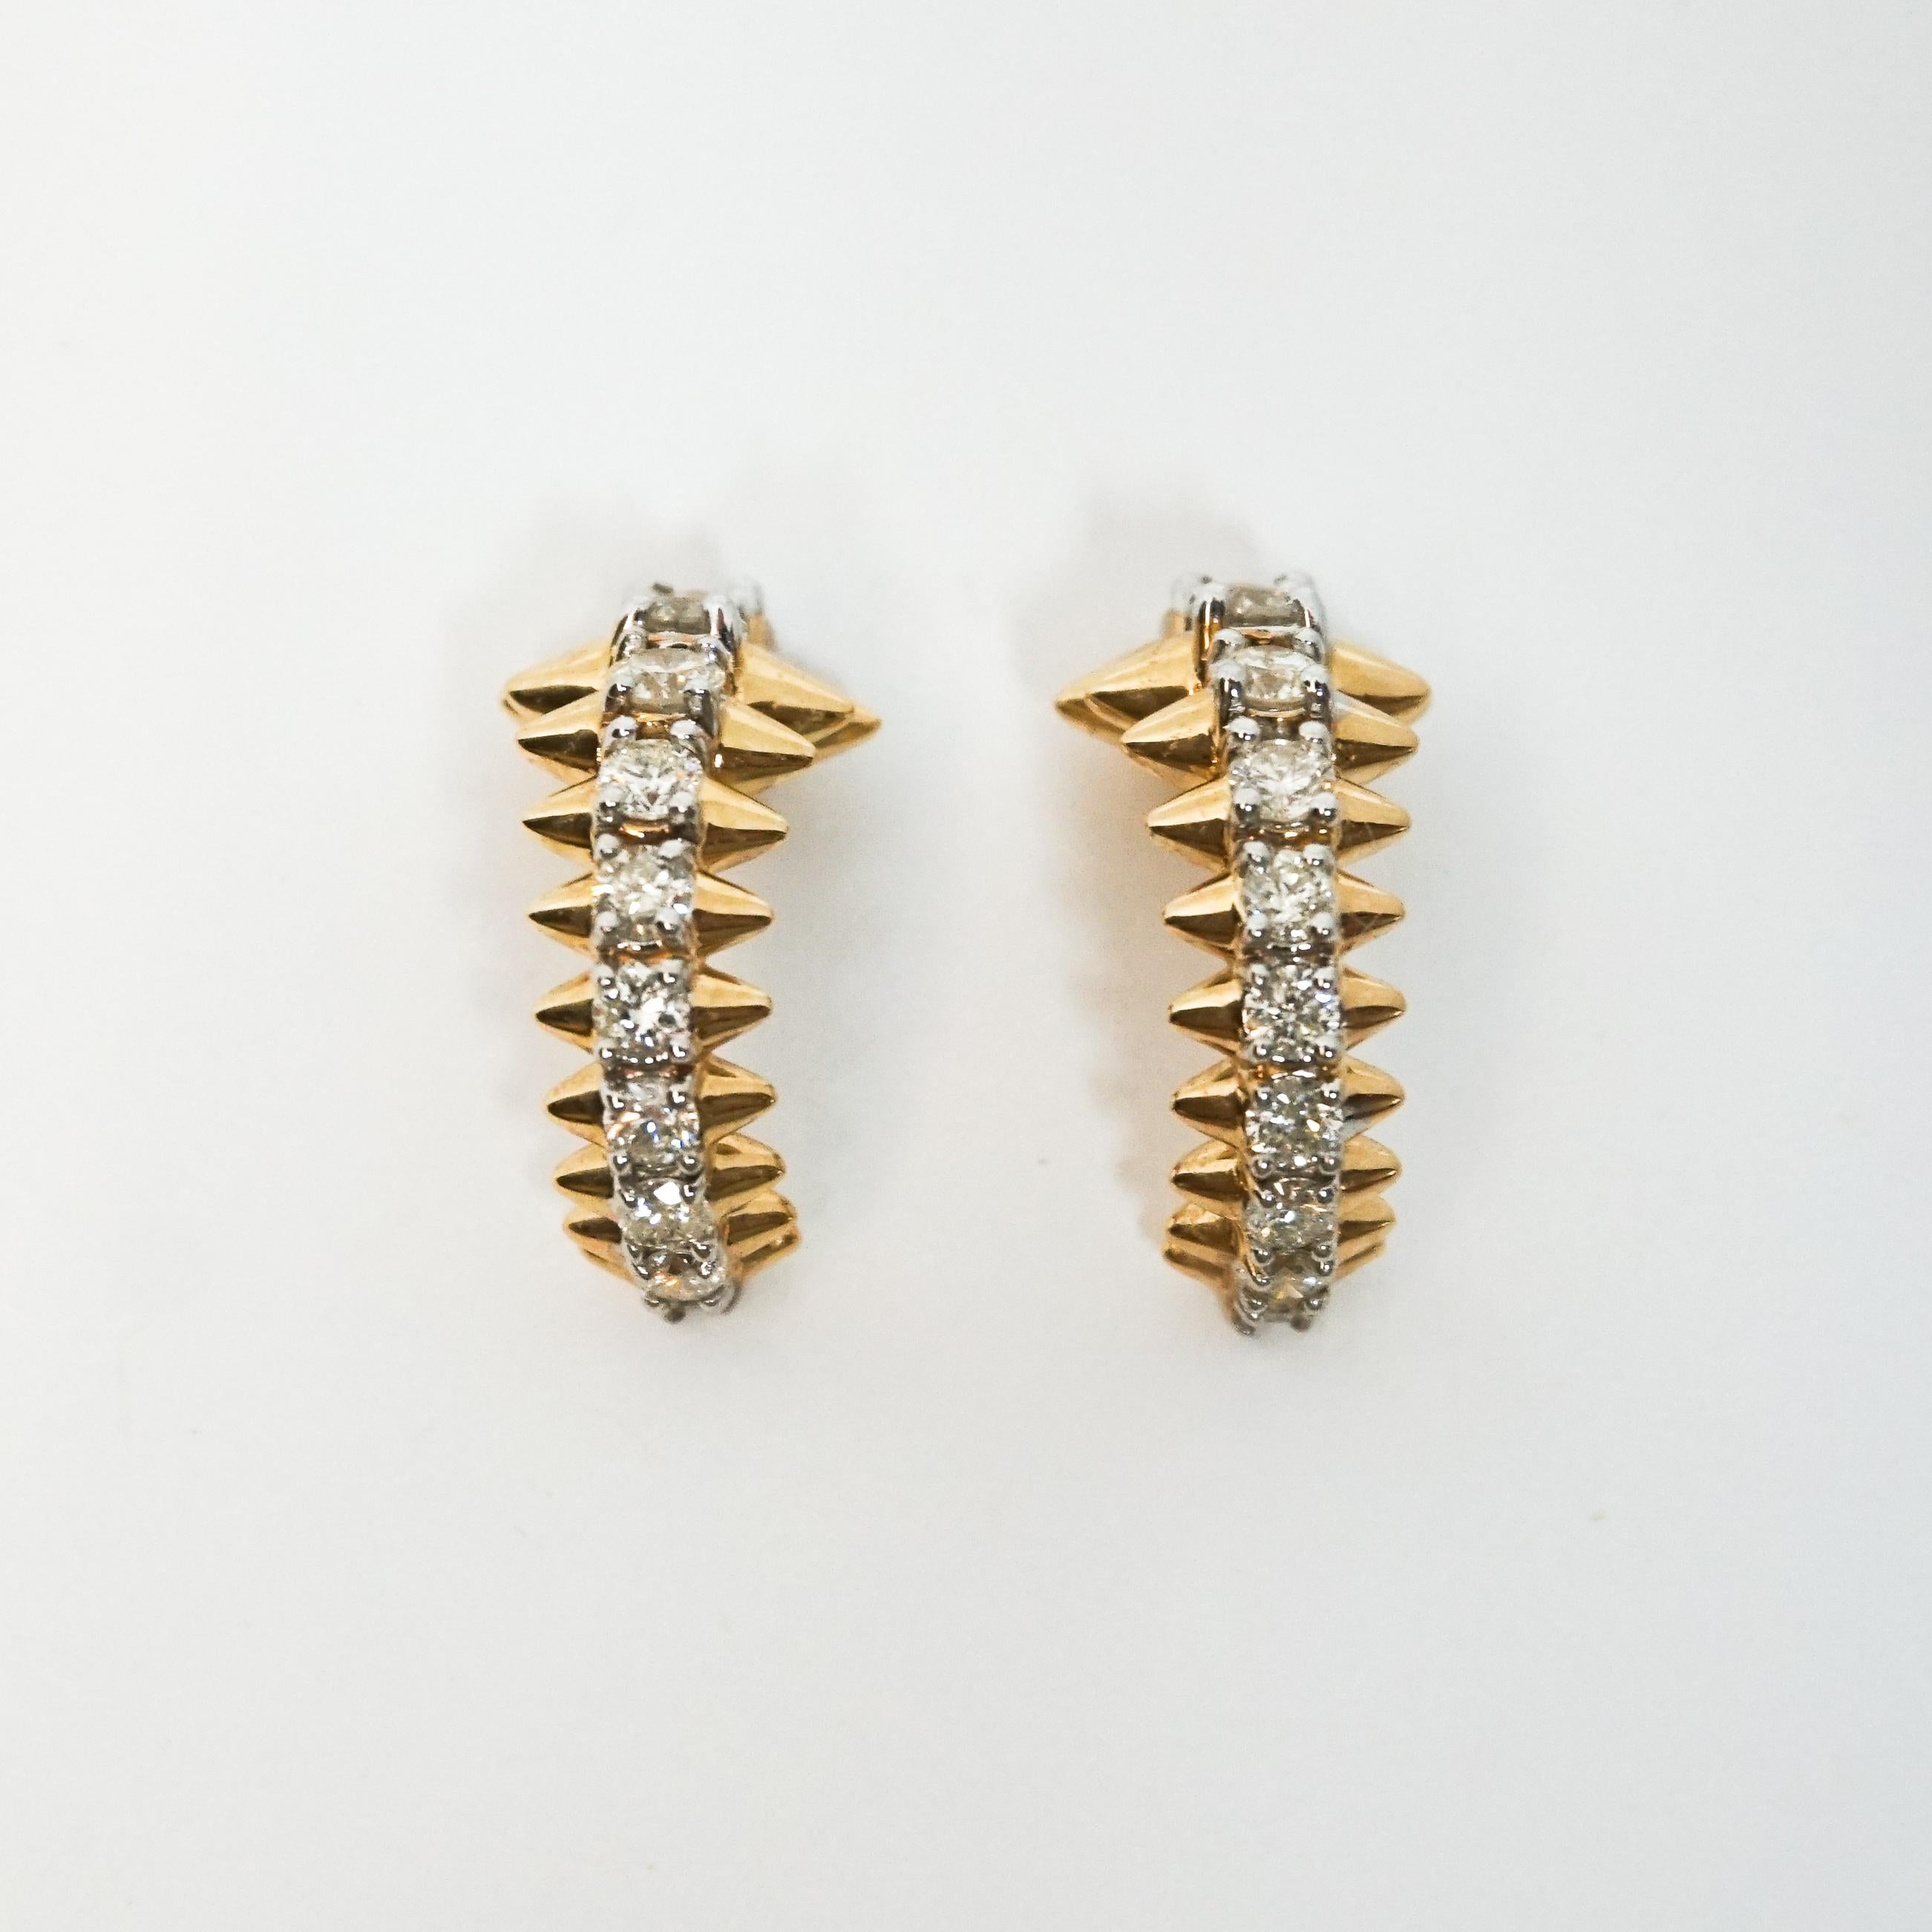 Adina Reyter One of a Kind Large Diamond Spike Dragon Hoops - Y14

Add an edgy flare to your ensemble with these One of a Kind Large Diamond Spike Dragon Hoops. 14k yellow gold huggie hoops with graduated spikes and prong set diamond rounds.

Total